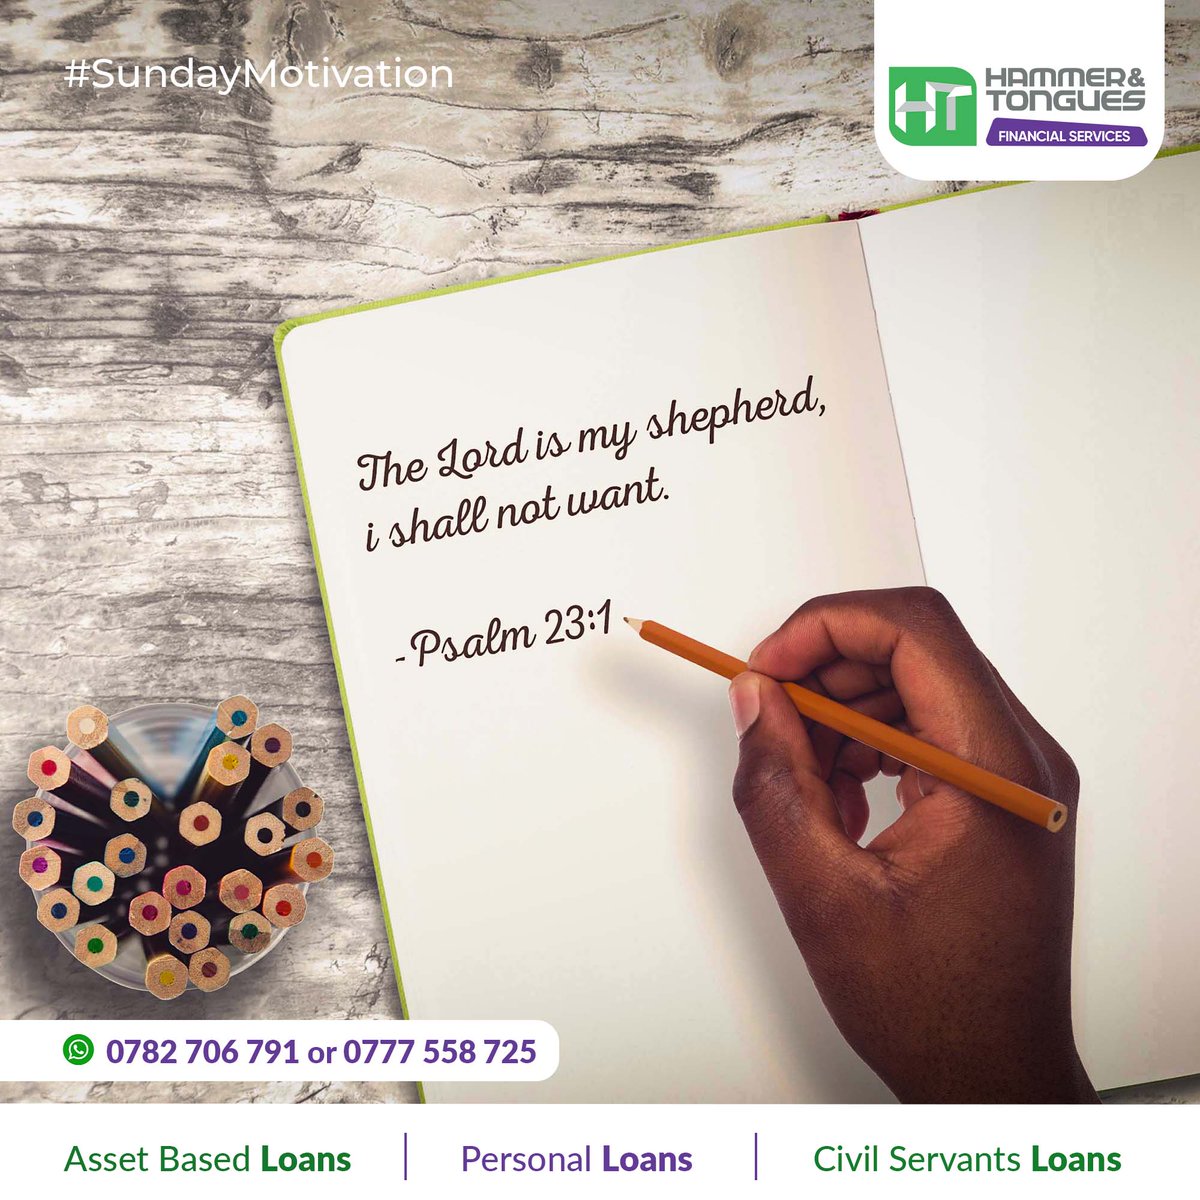 The Lord is my shepherd, I shall not want.- Psalm 23:1.
#SundayDevotion
#Debts
#Loans
#Family
#Money
#Reliable